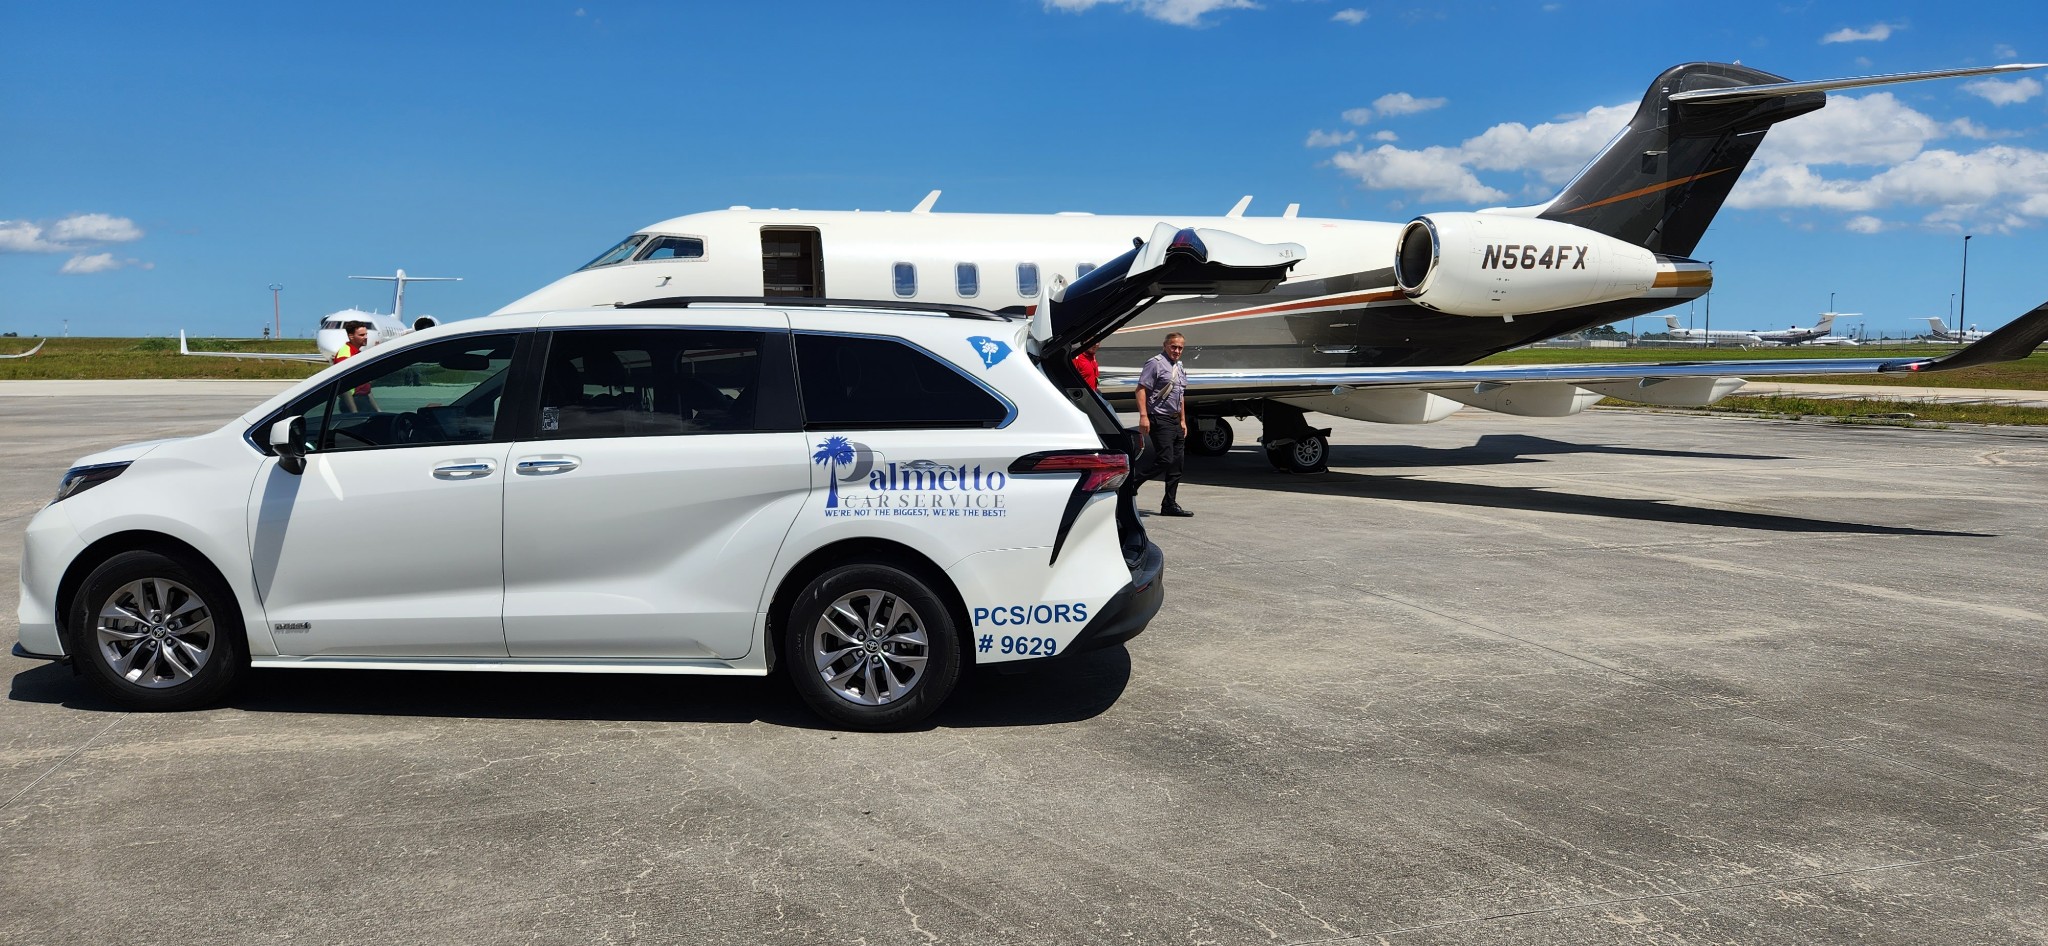 Palmetto Car Service: Your Trusted Bluffton to Savannah Car Service